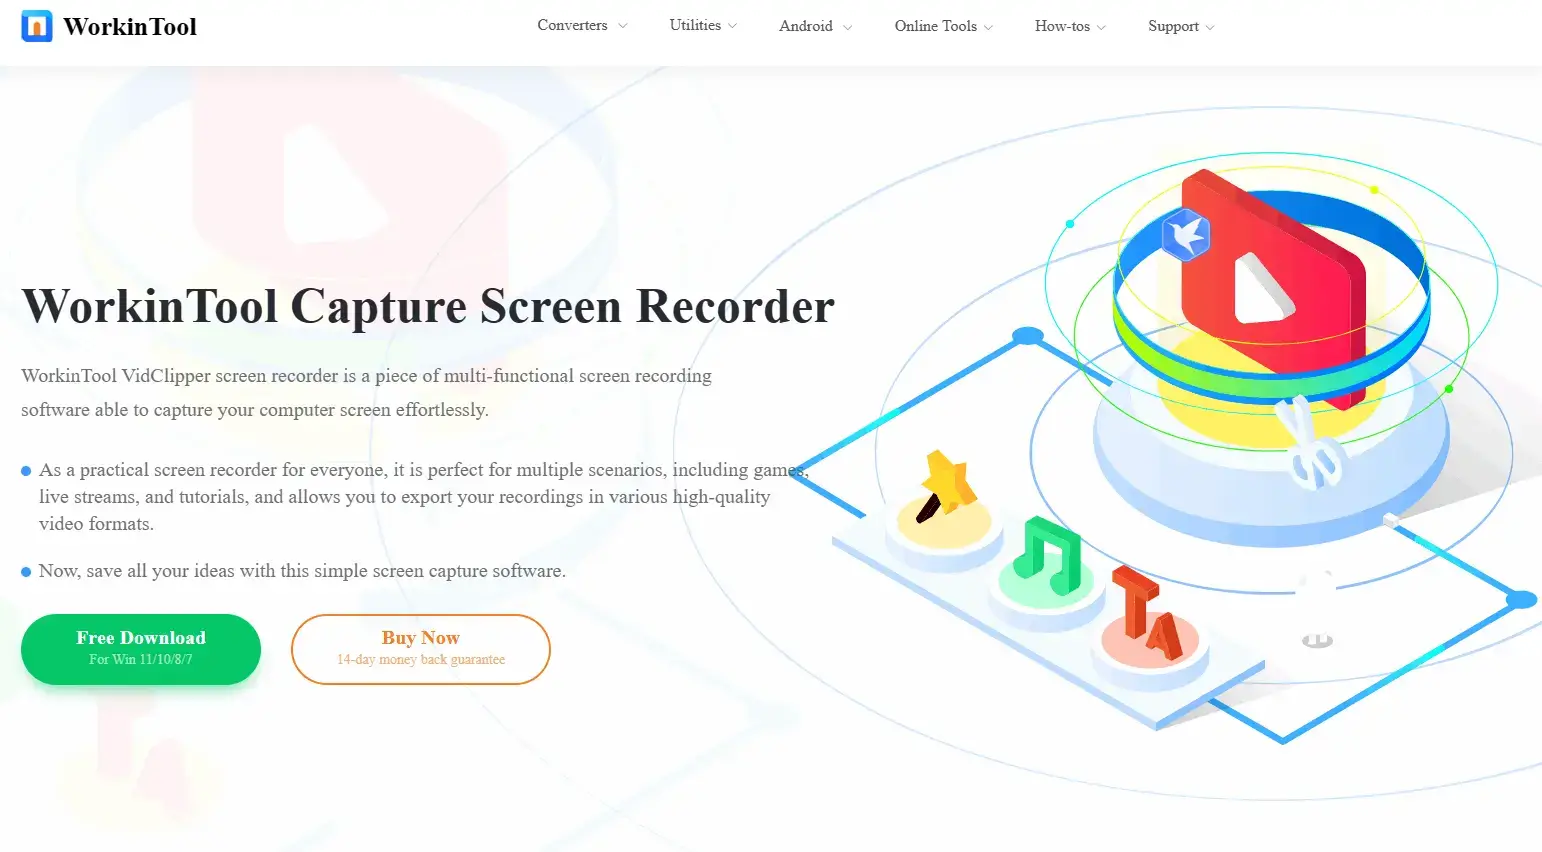 workintool capture screen recorder review official website page